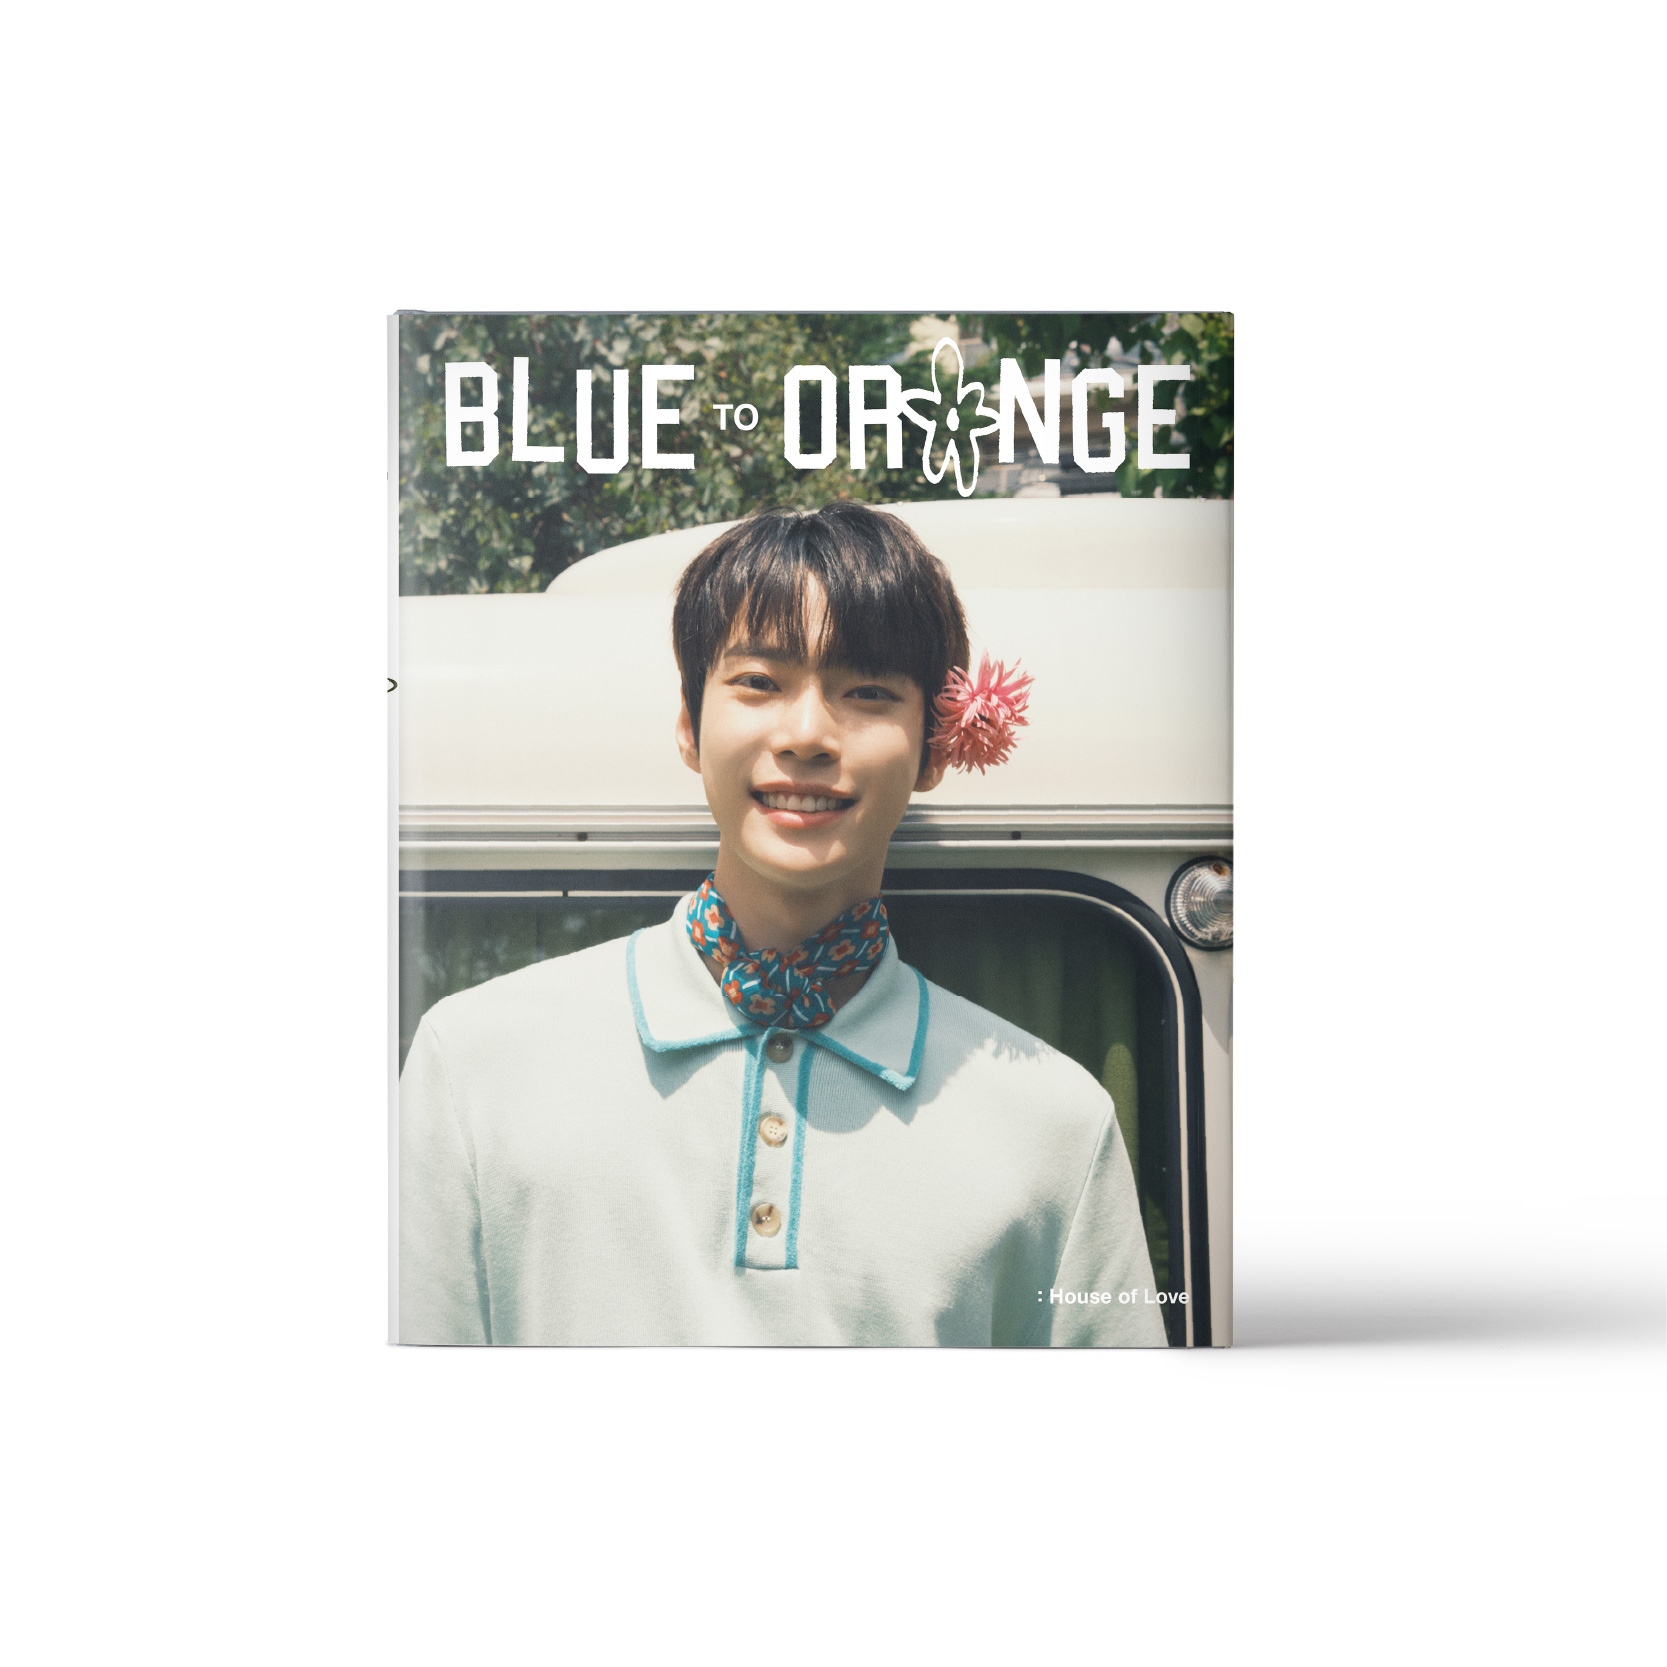 [DOYOUNG] NCT 127 PHOTO BOOK [BLUE TO ORANGE]